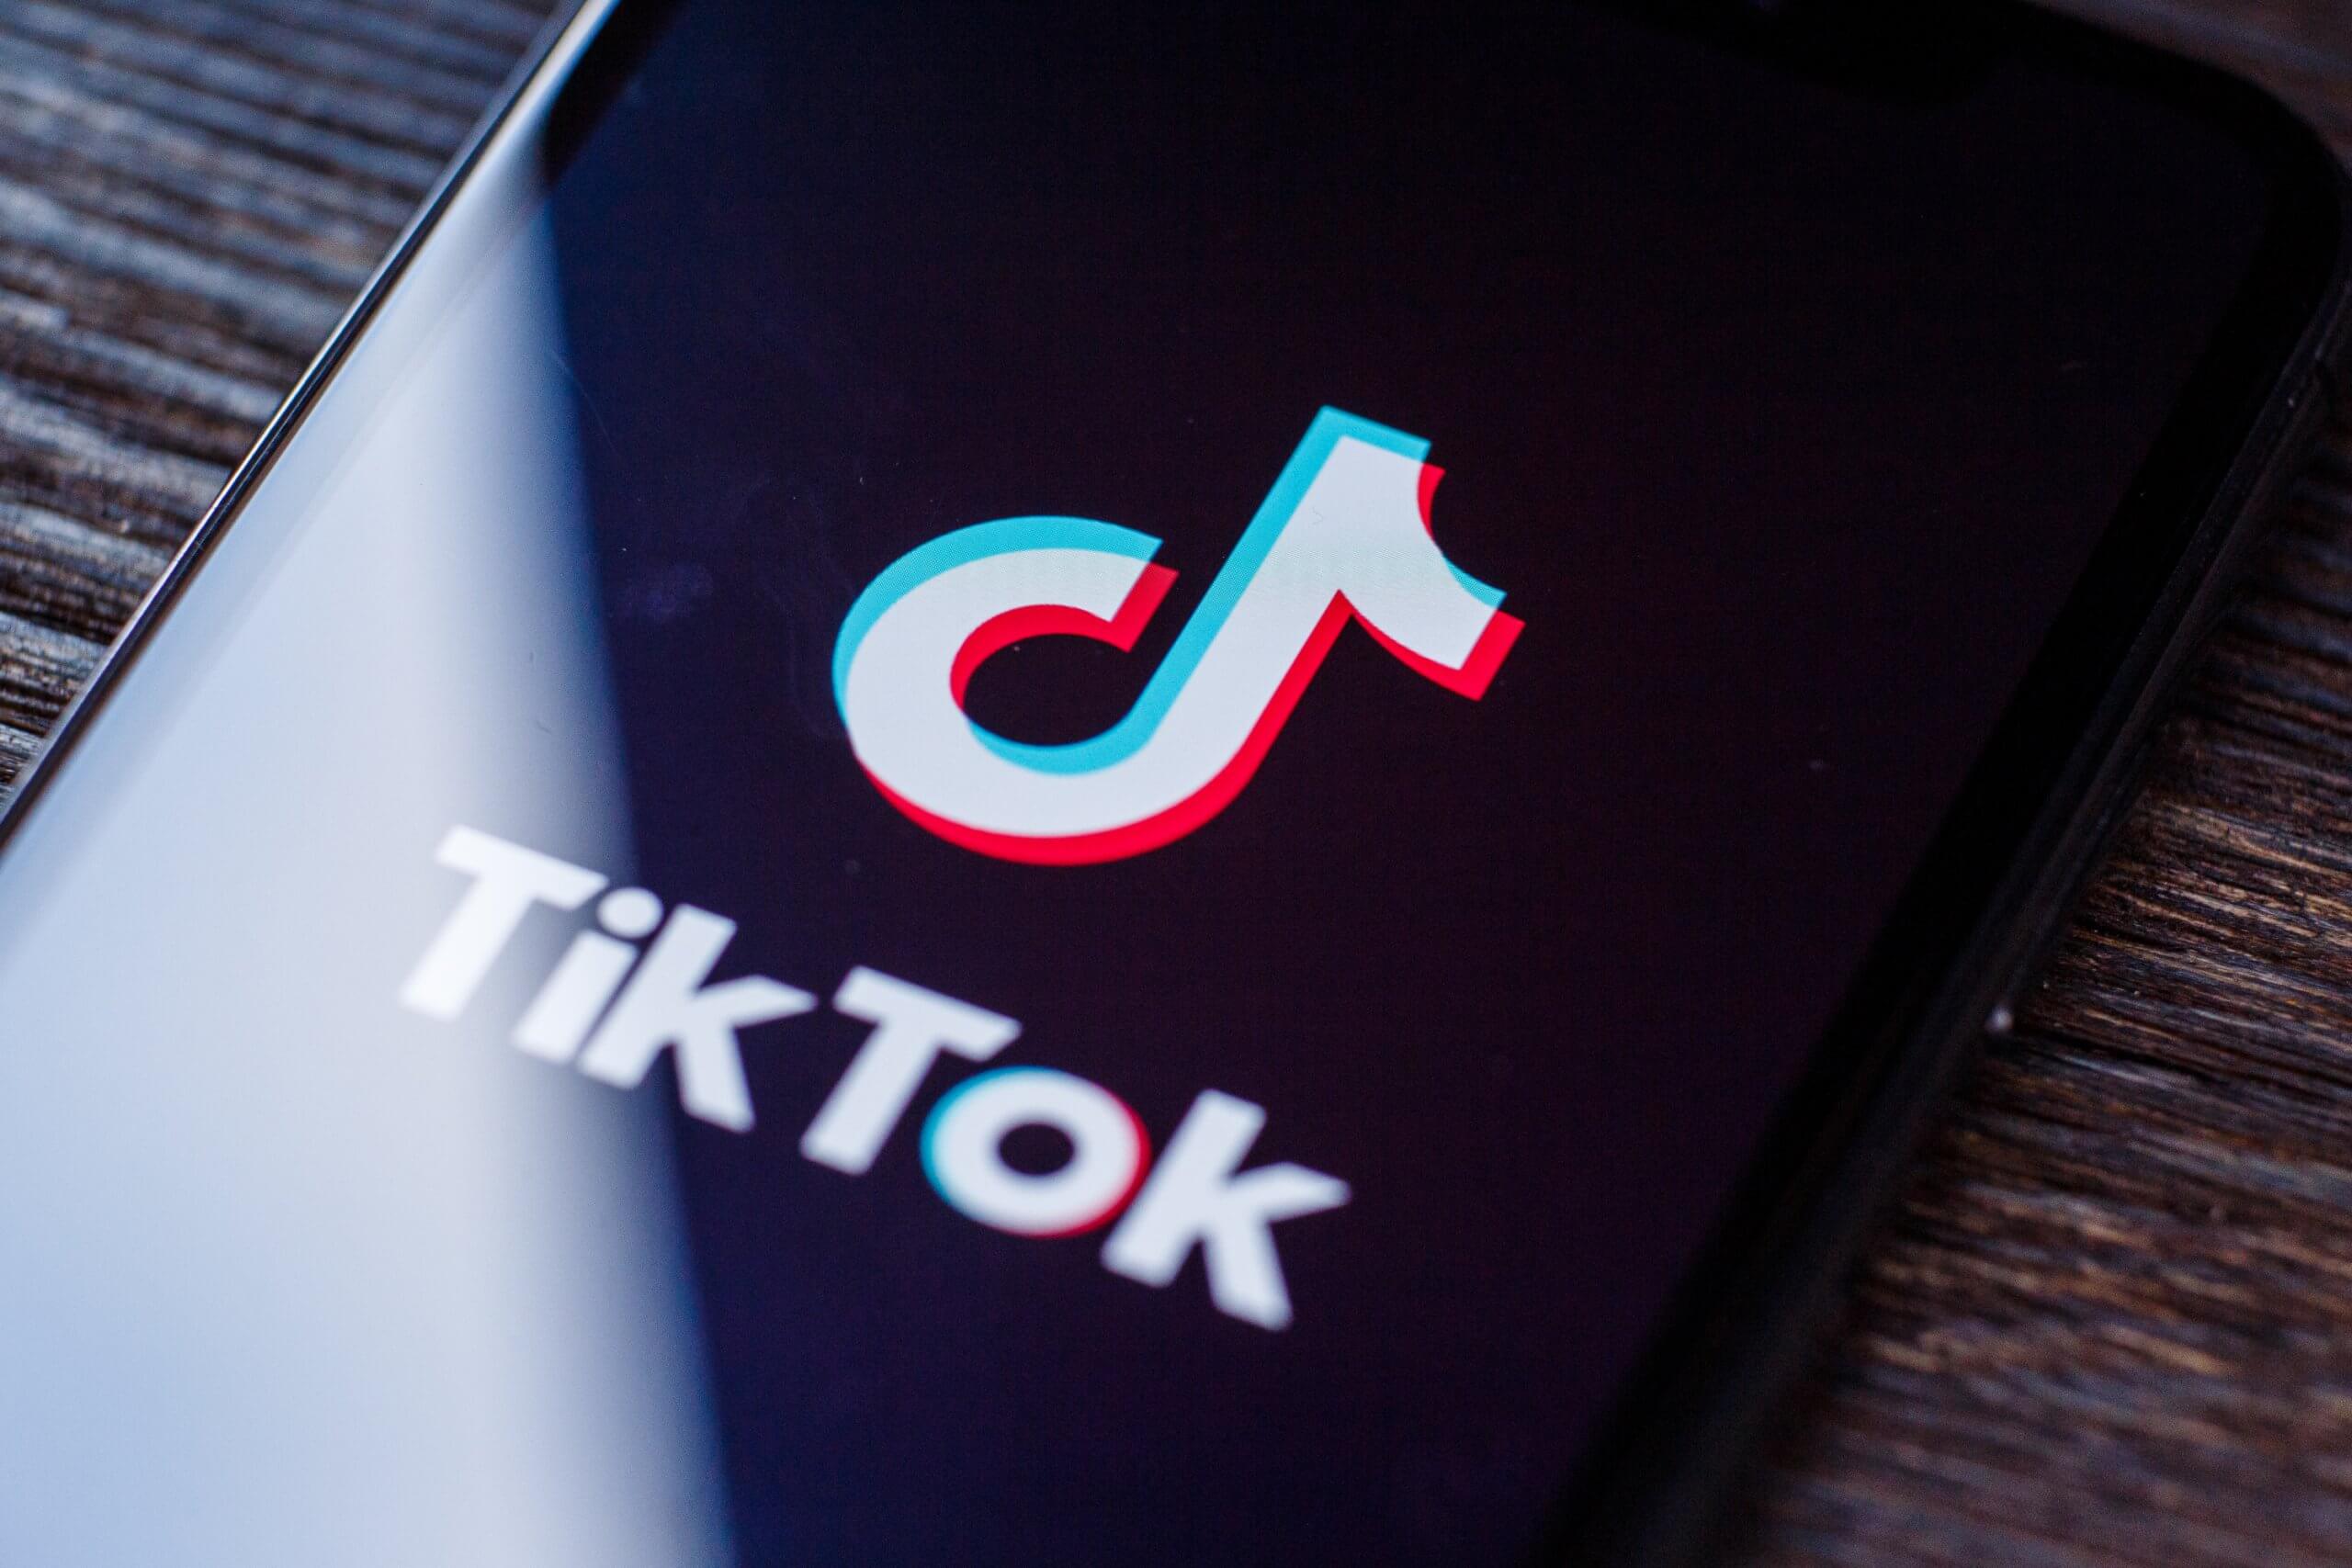 TikTok is one of the fastest growing apps globally